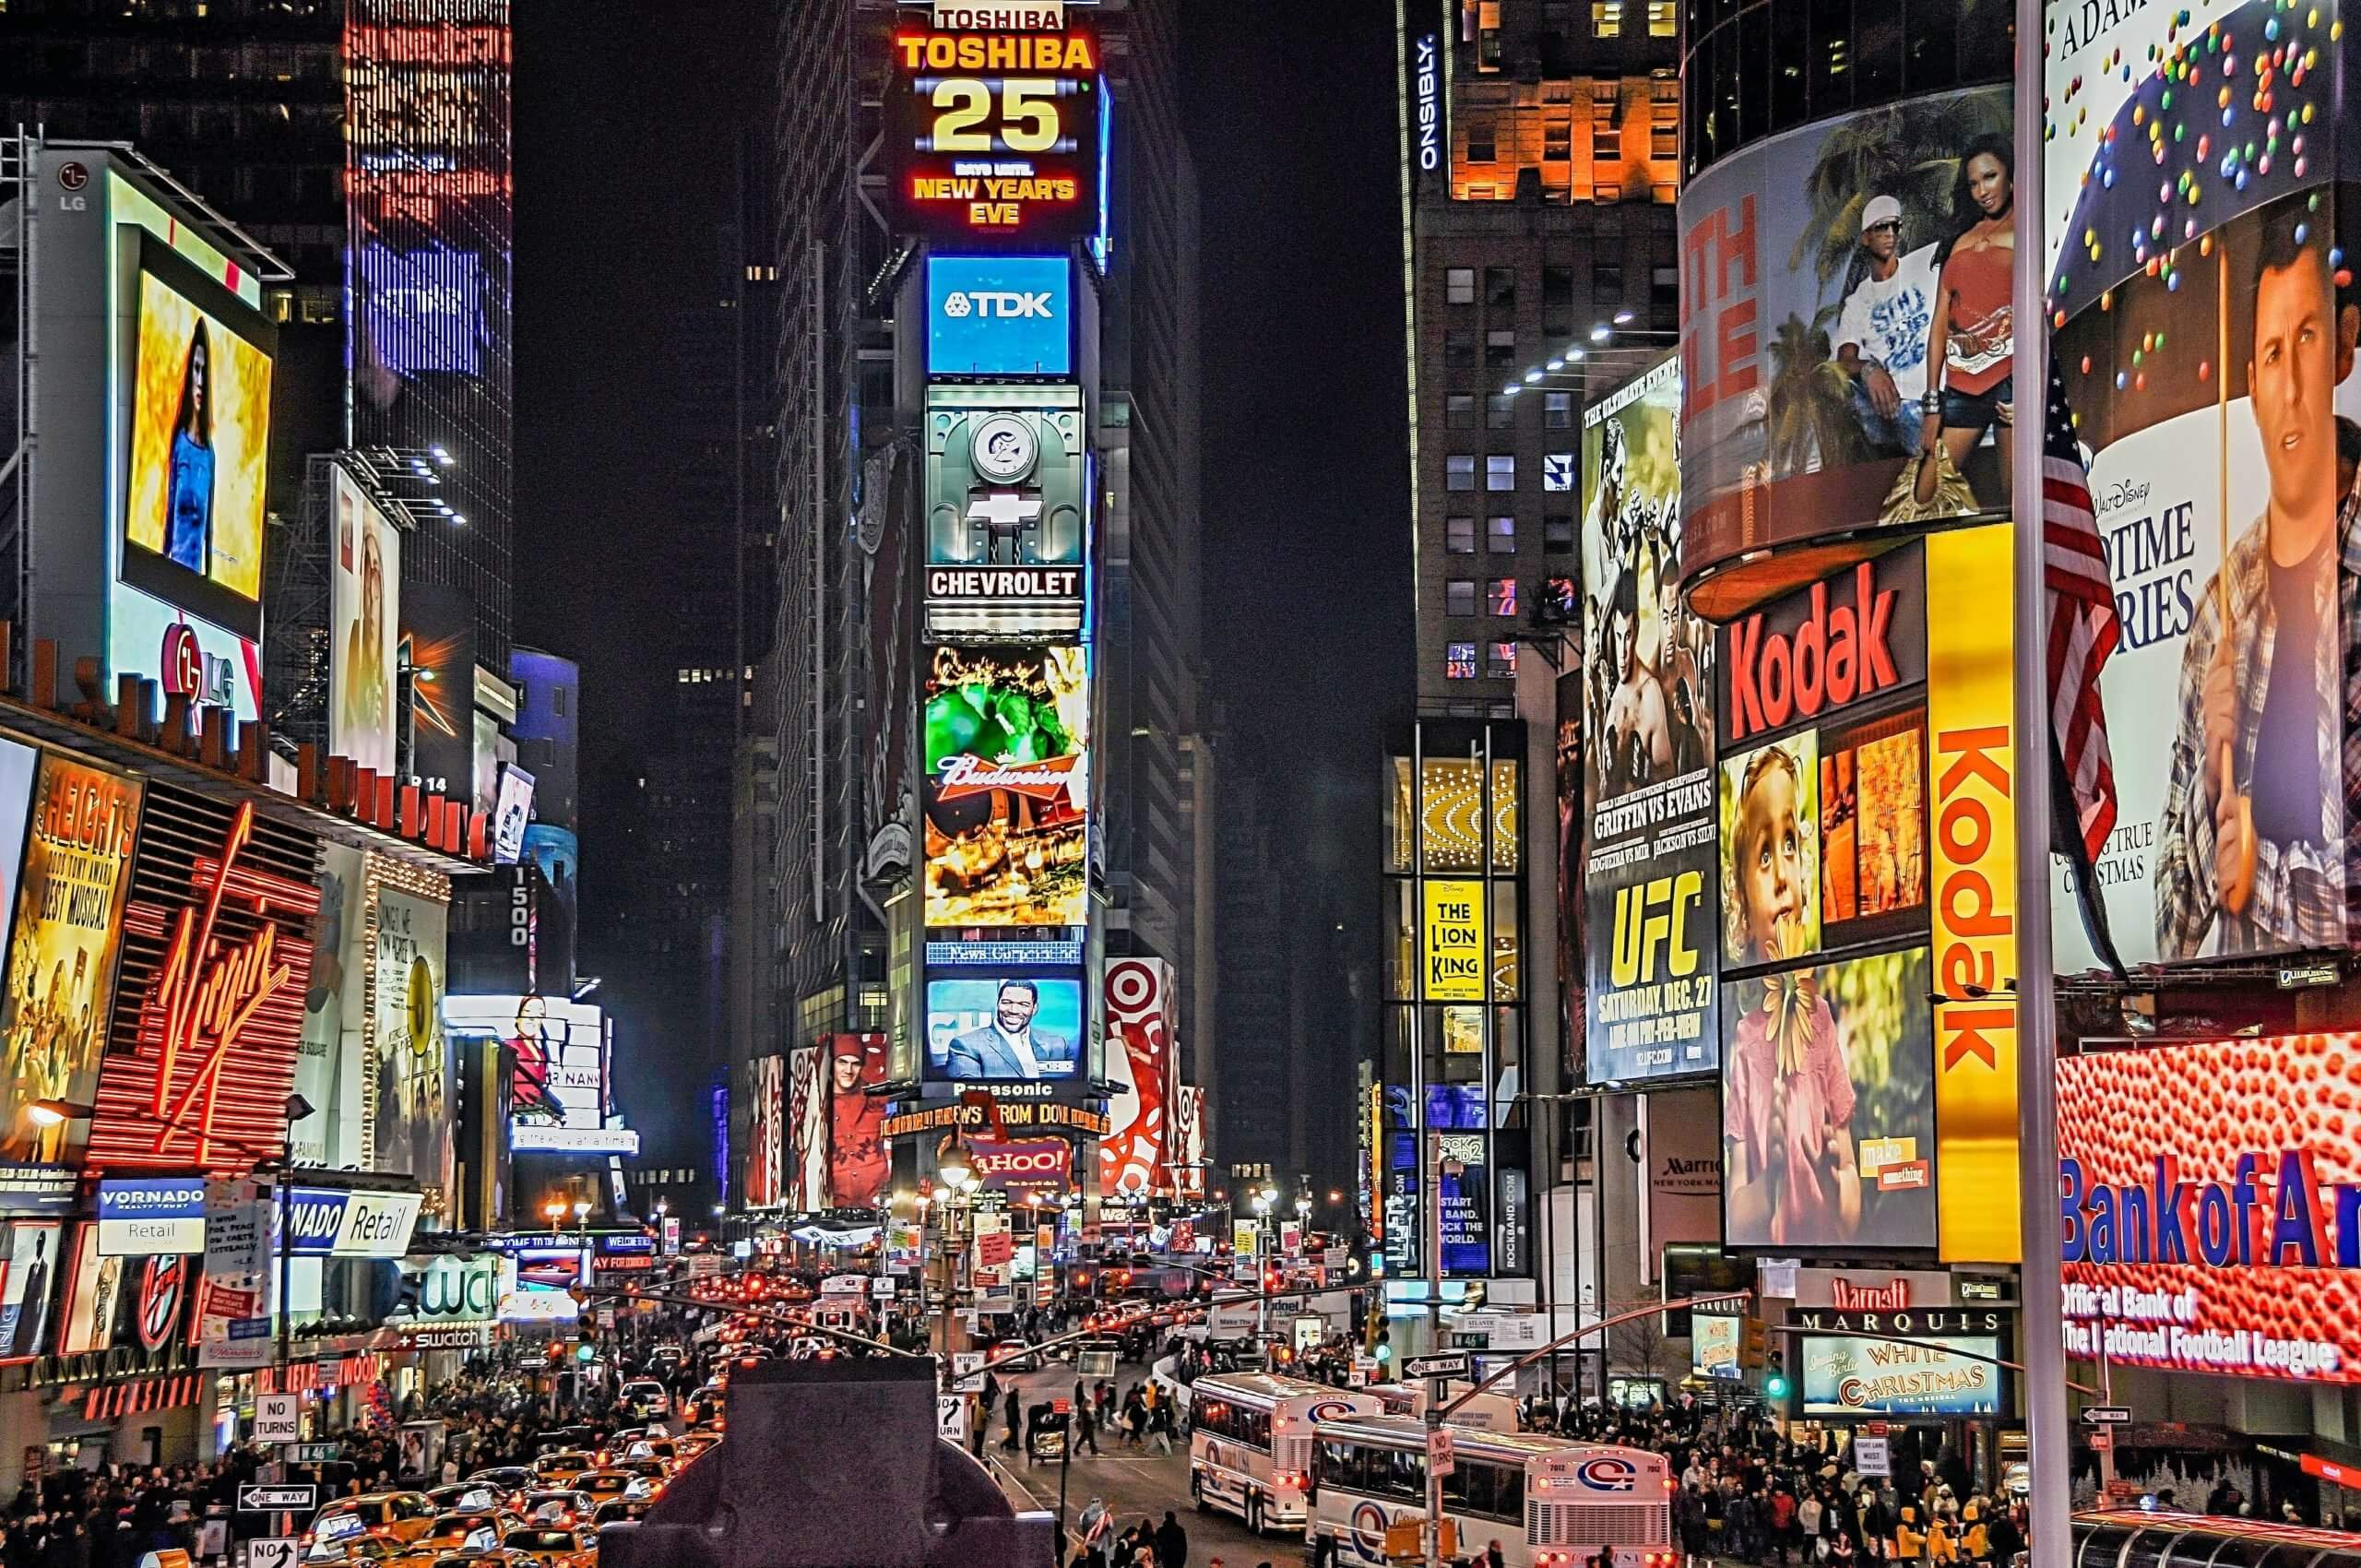 Neon signs and billboards illuminate the busy streets in New York’s Times Square at night.